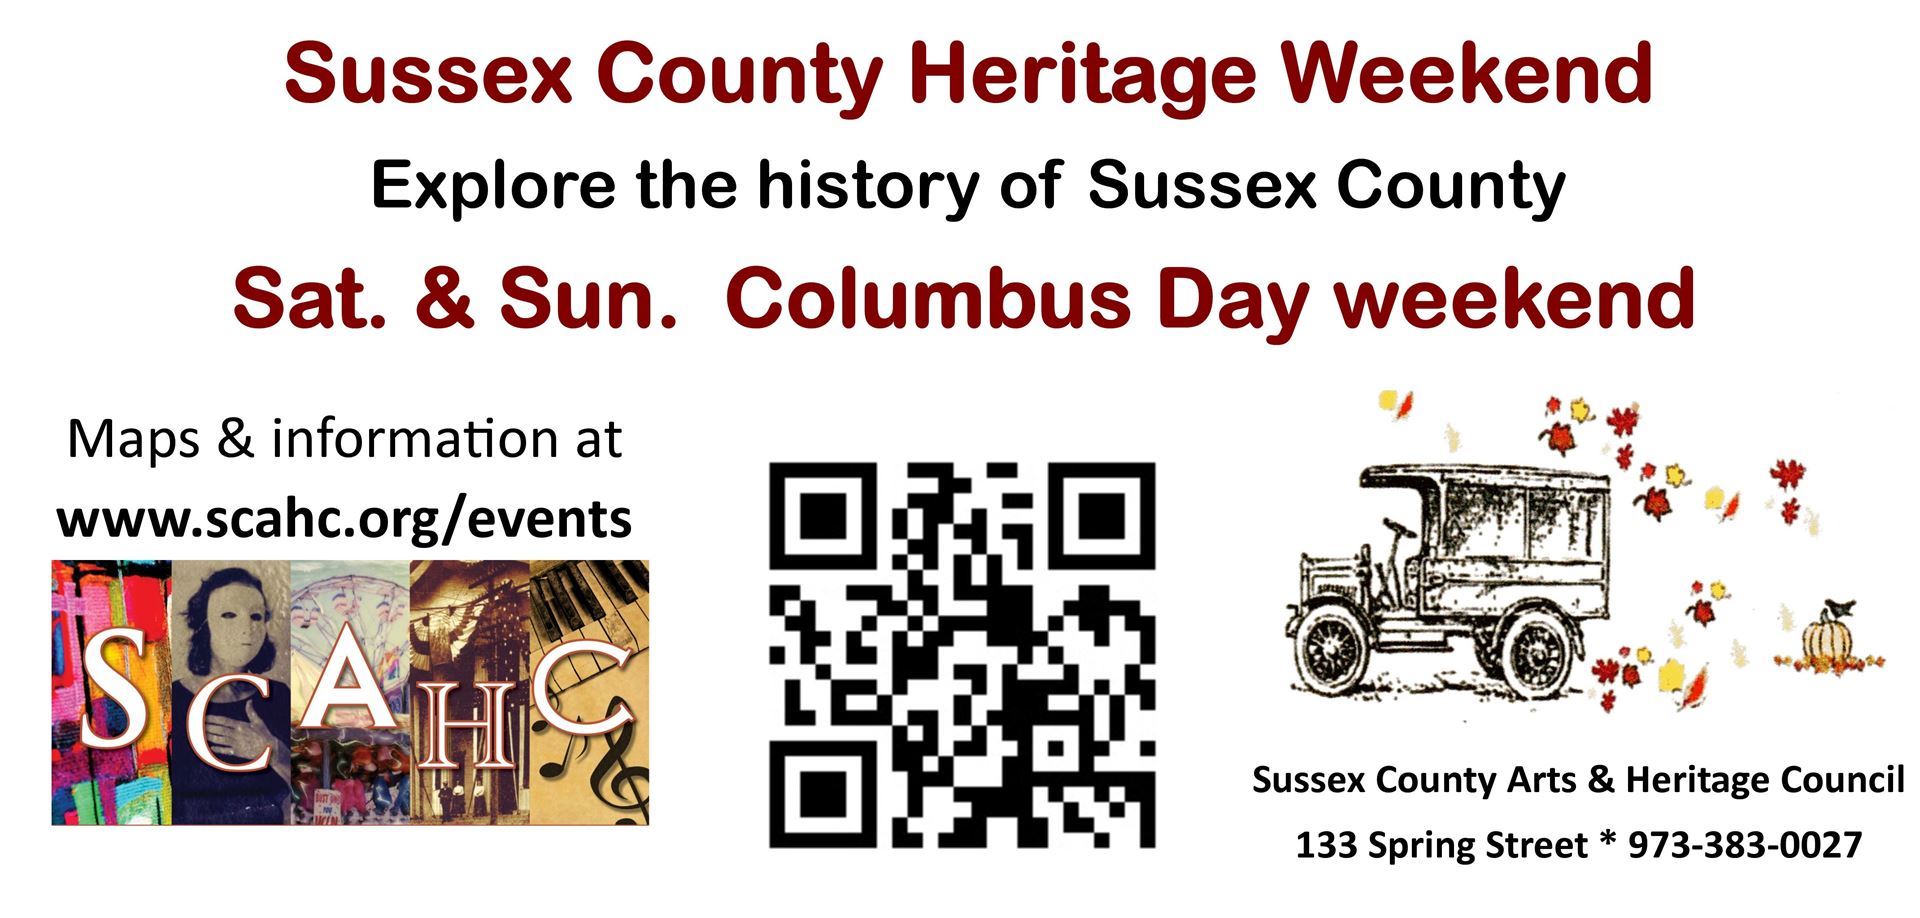 Sussex County Heritage Weekend. Explore the History of  Sussex County. Sat. & Sun. Columbus Day Weekend. Maps & Information at www.scahc.org/events. Image: SCAHC Logo, QR code to website, and antique car.